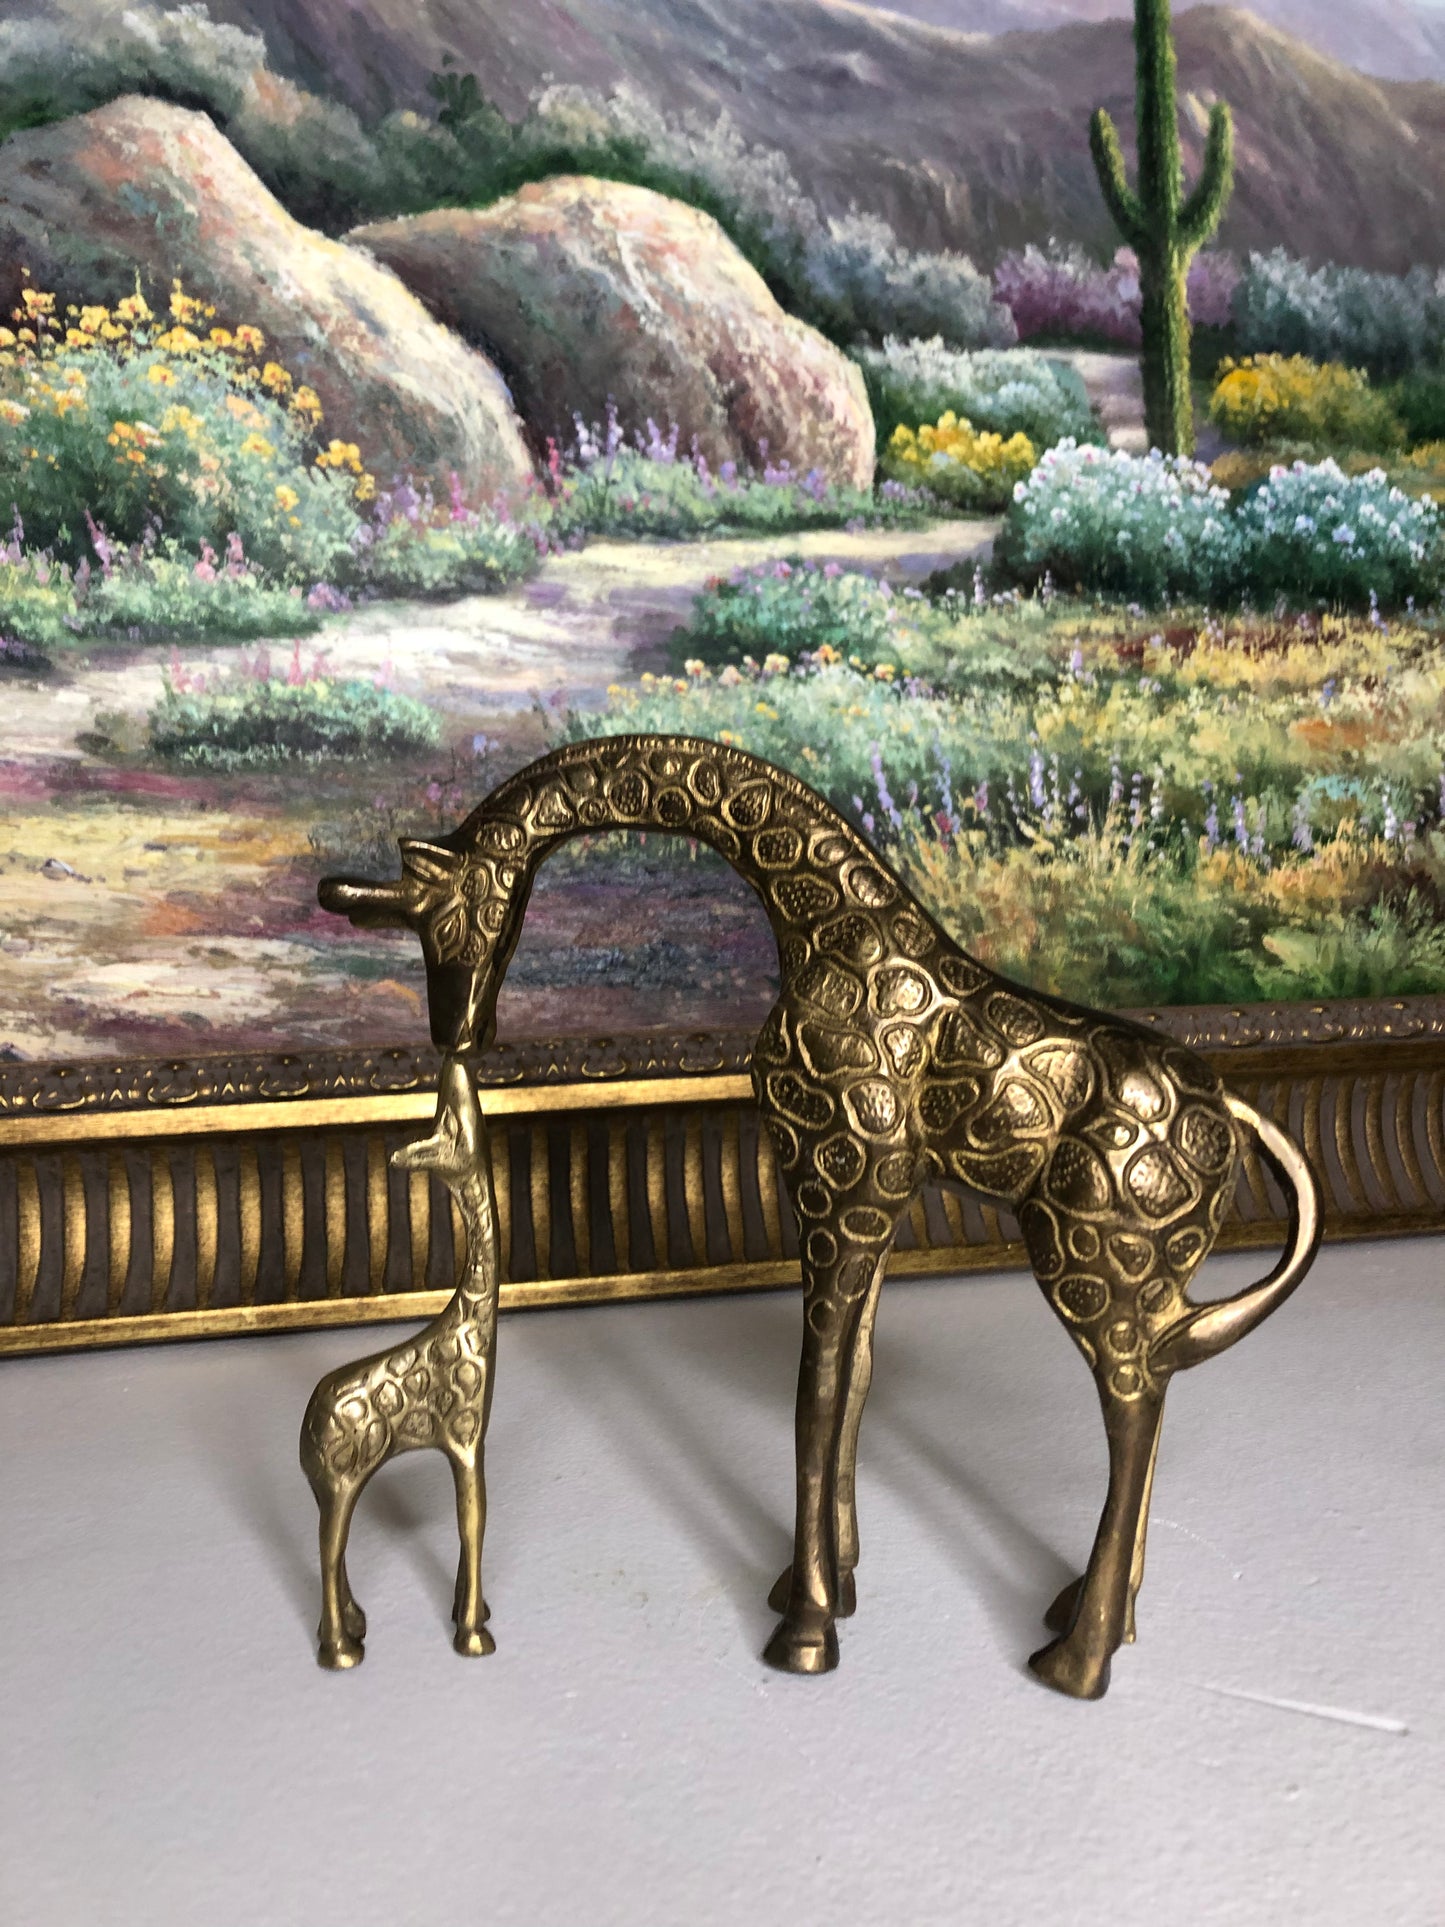 Sweetest brass mother and baby giraffe pair - Excellent condition!